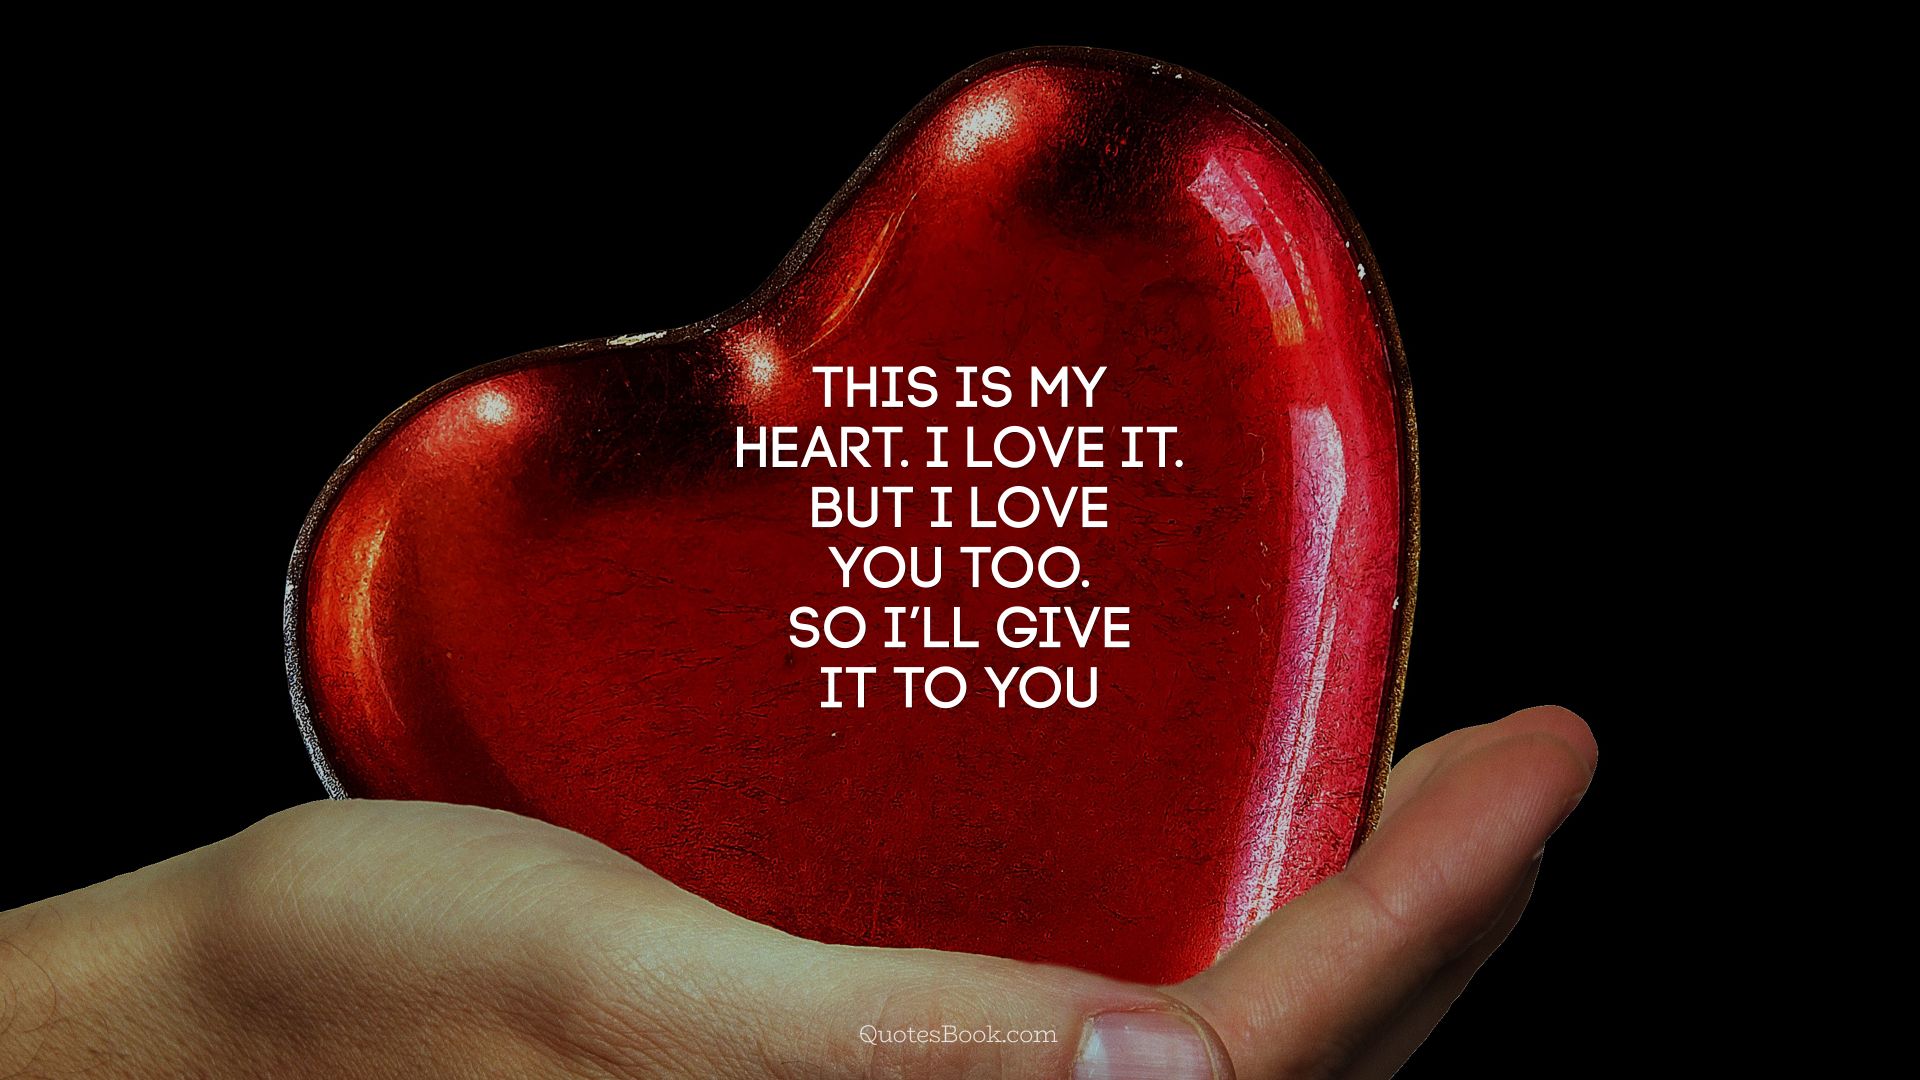 This is my heart. I love it. But I love you too. So I’ll give it to you